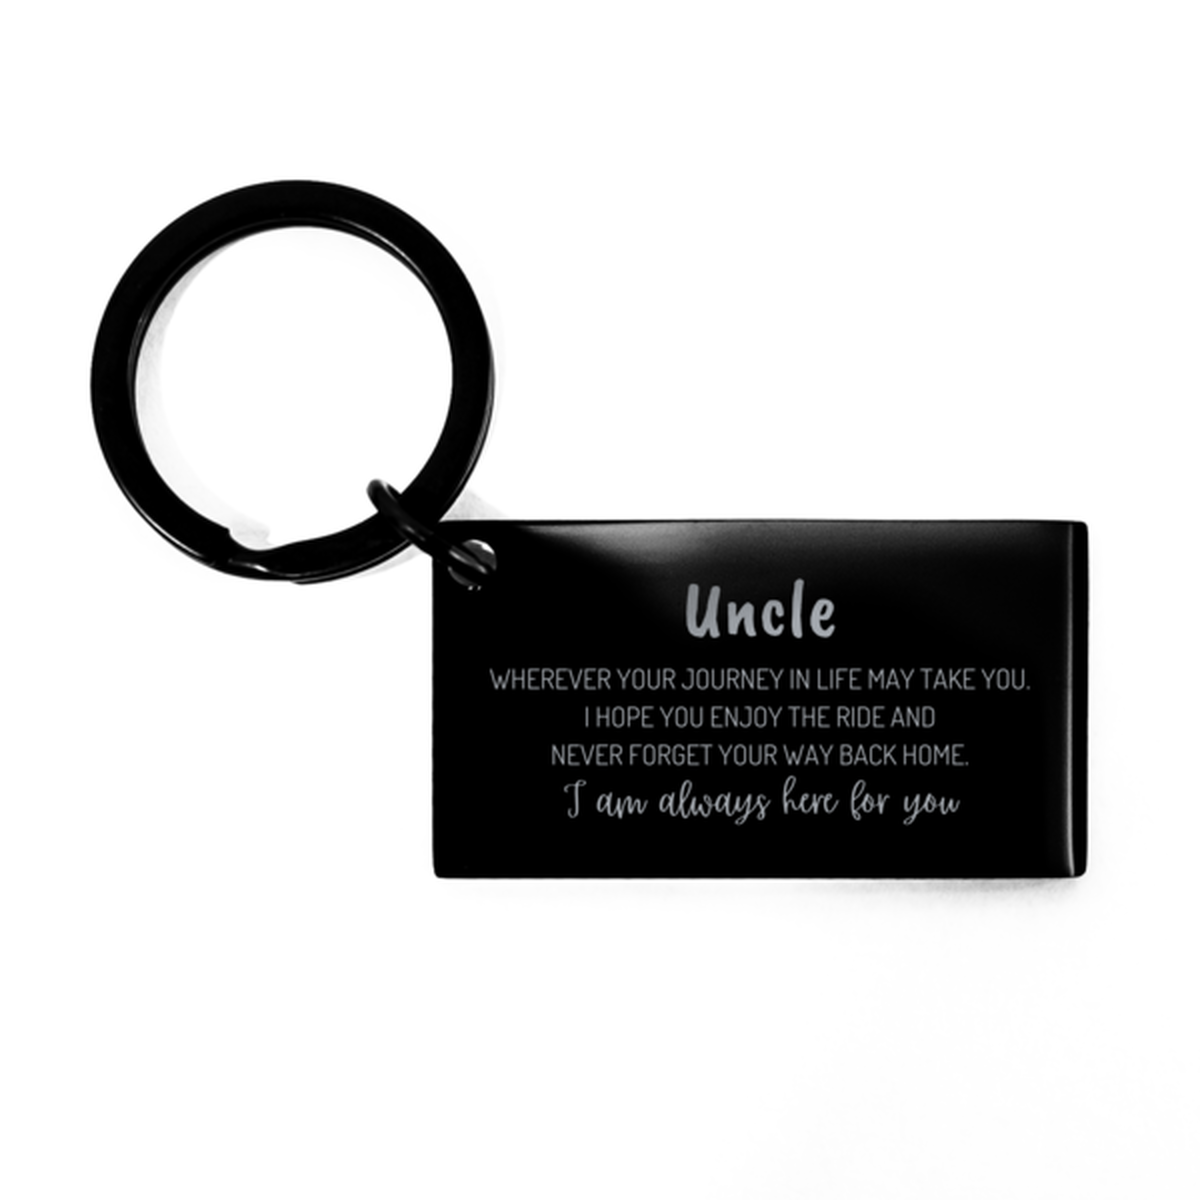 Uncle wherever your journey in life may take you, I am always here for you Uncle Keychain, Awesome Christmas Gifts For Uncle, Uncle Birthday Gifts for Men Women Family Loved One